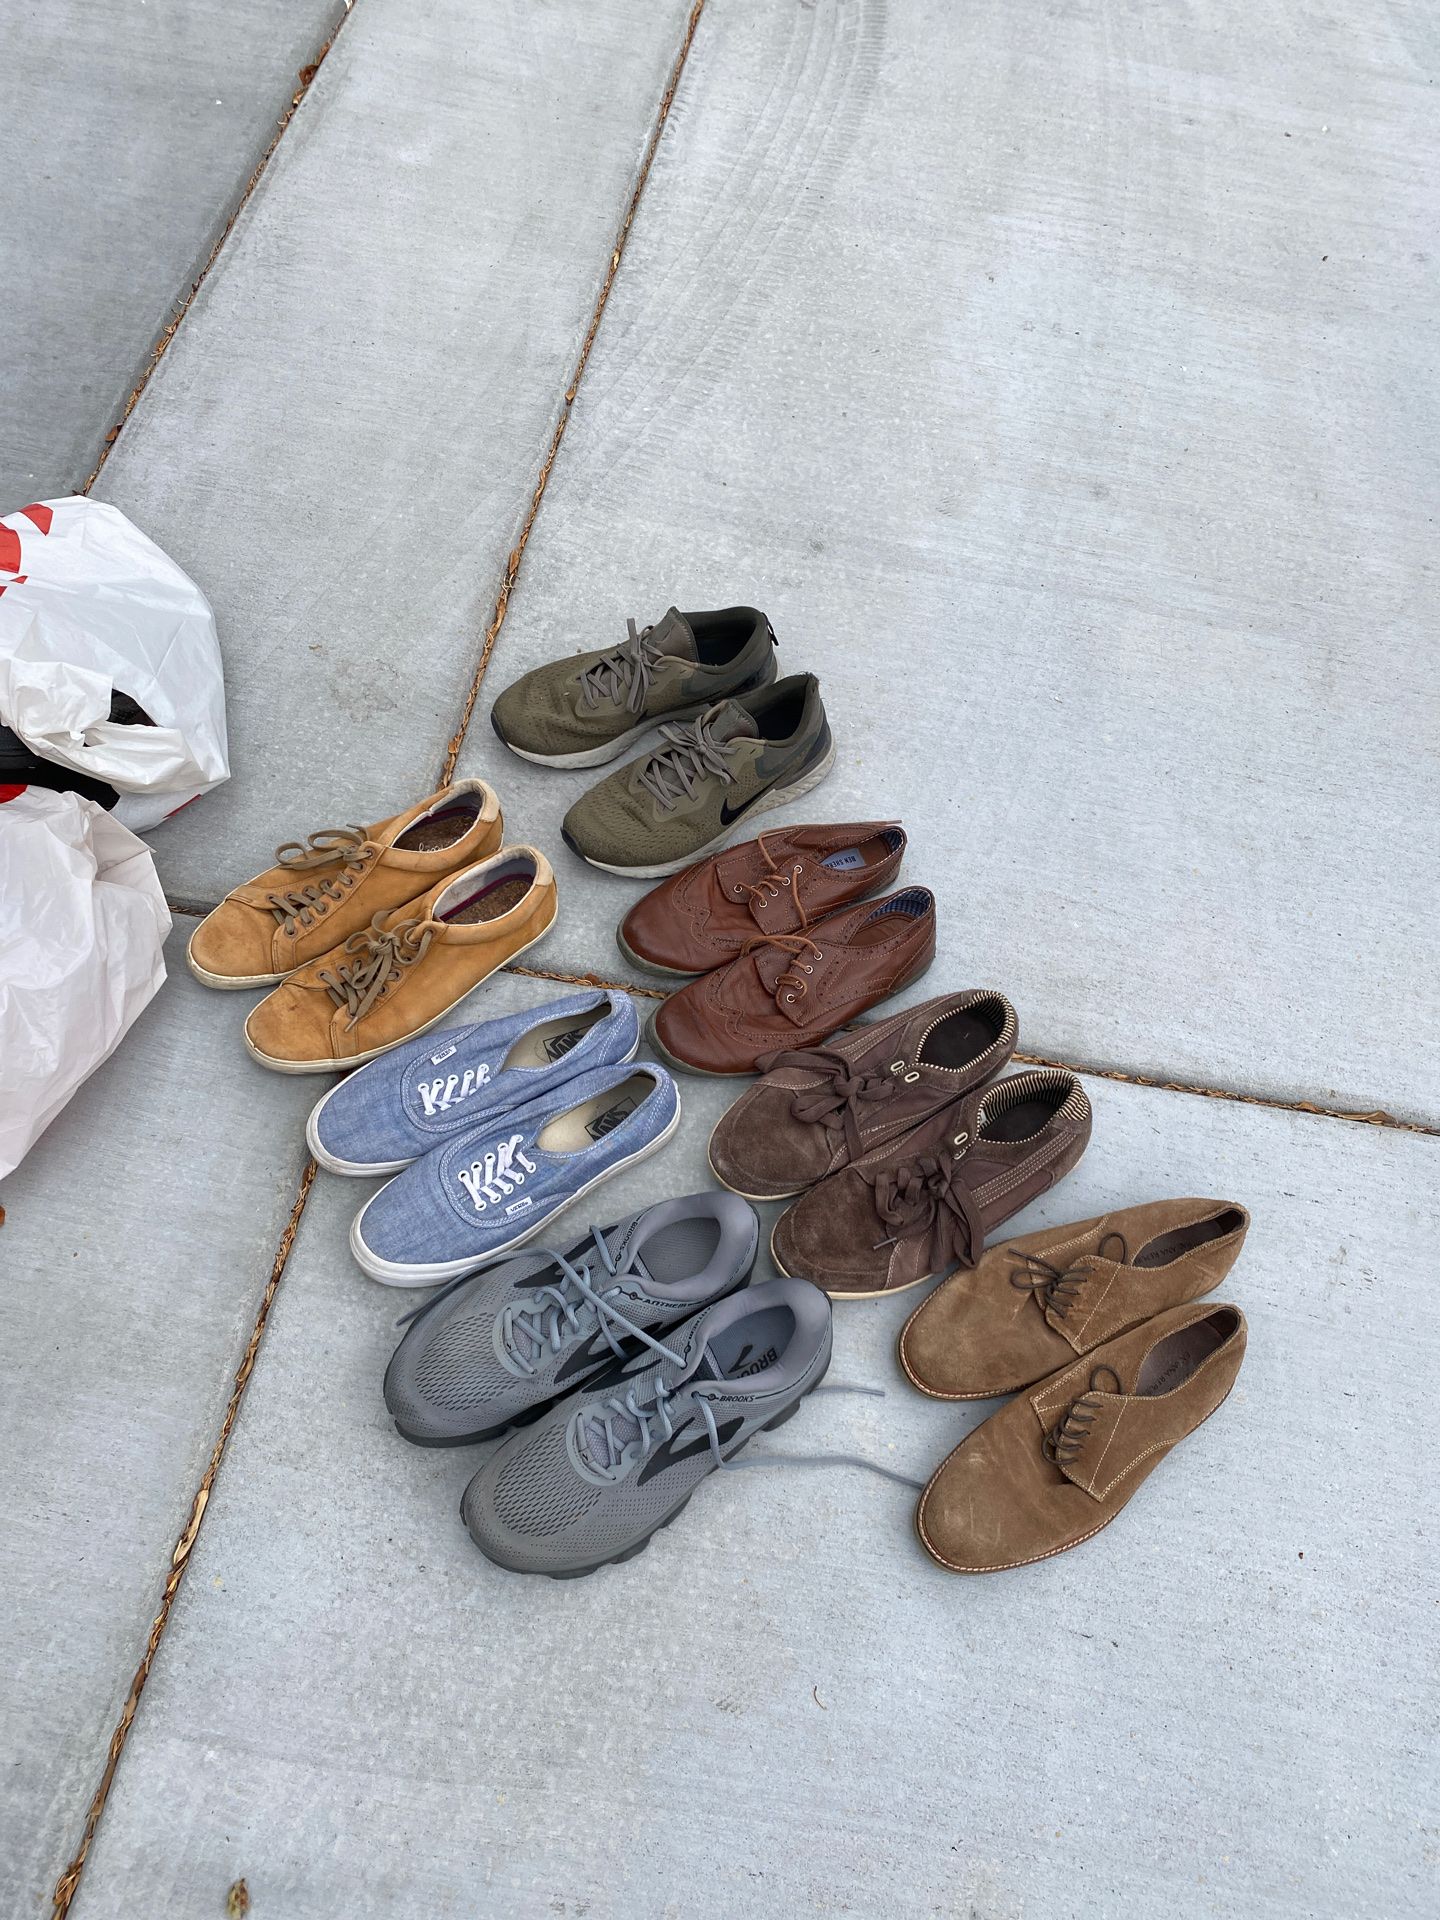 7 pairs of random branded shoes